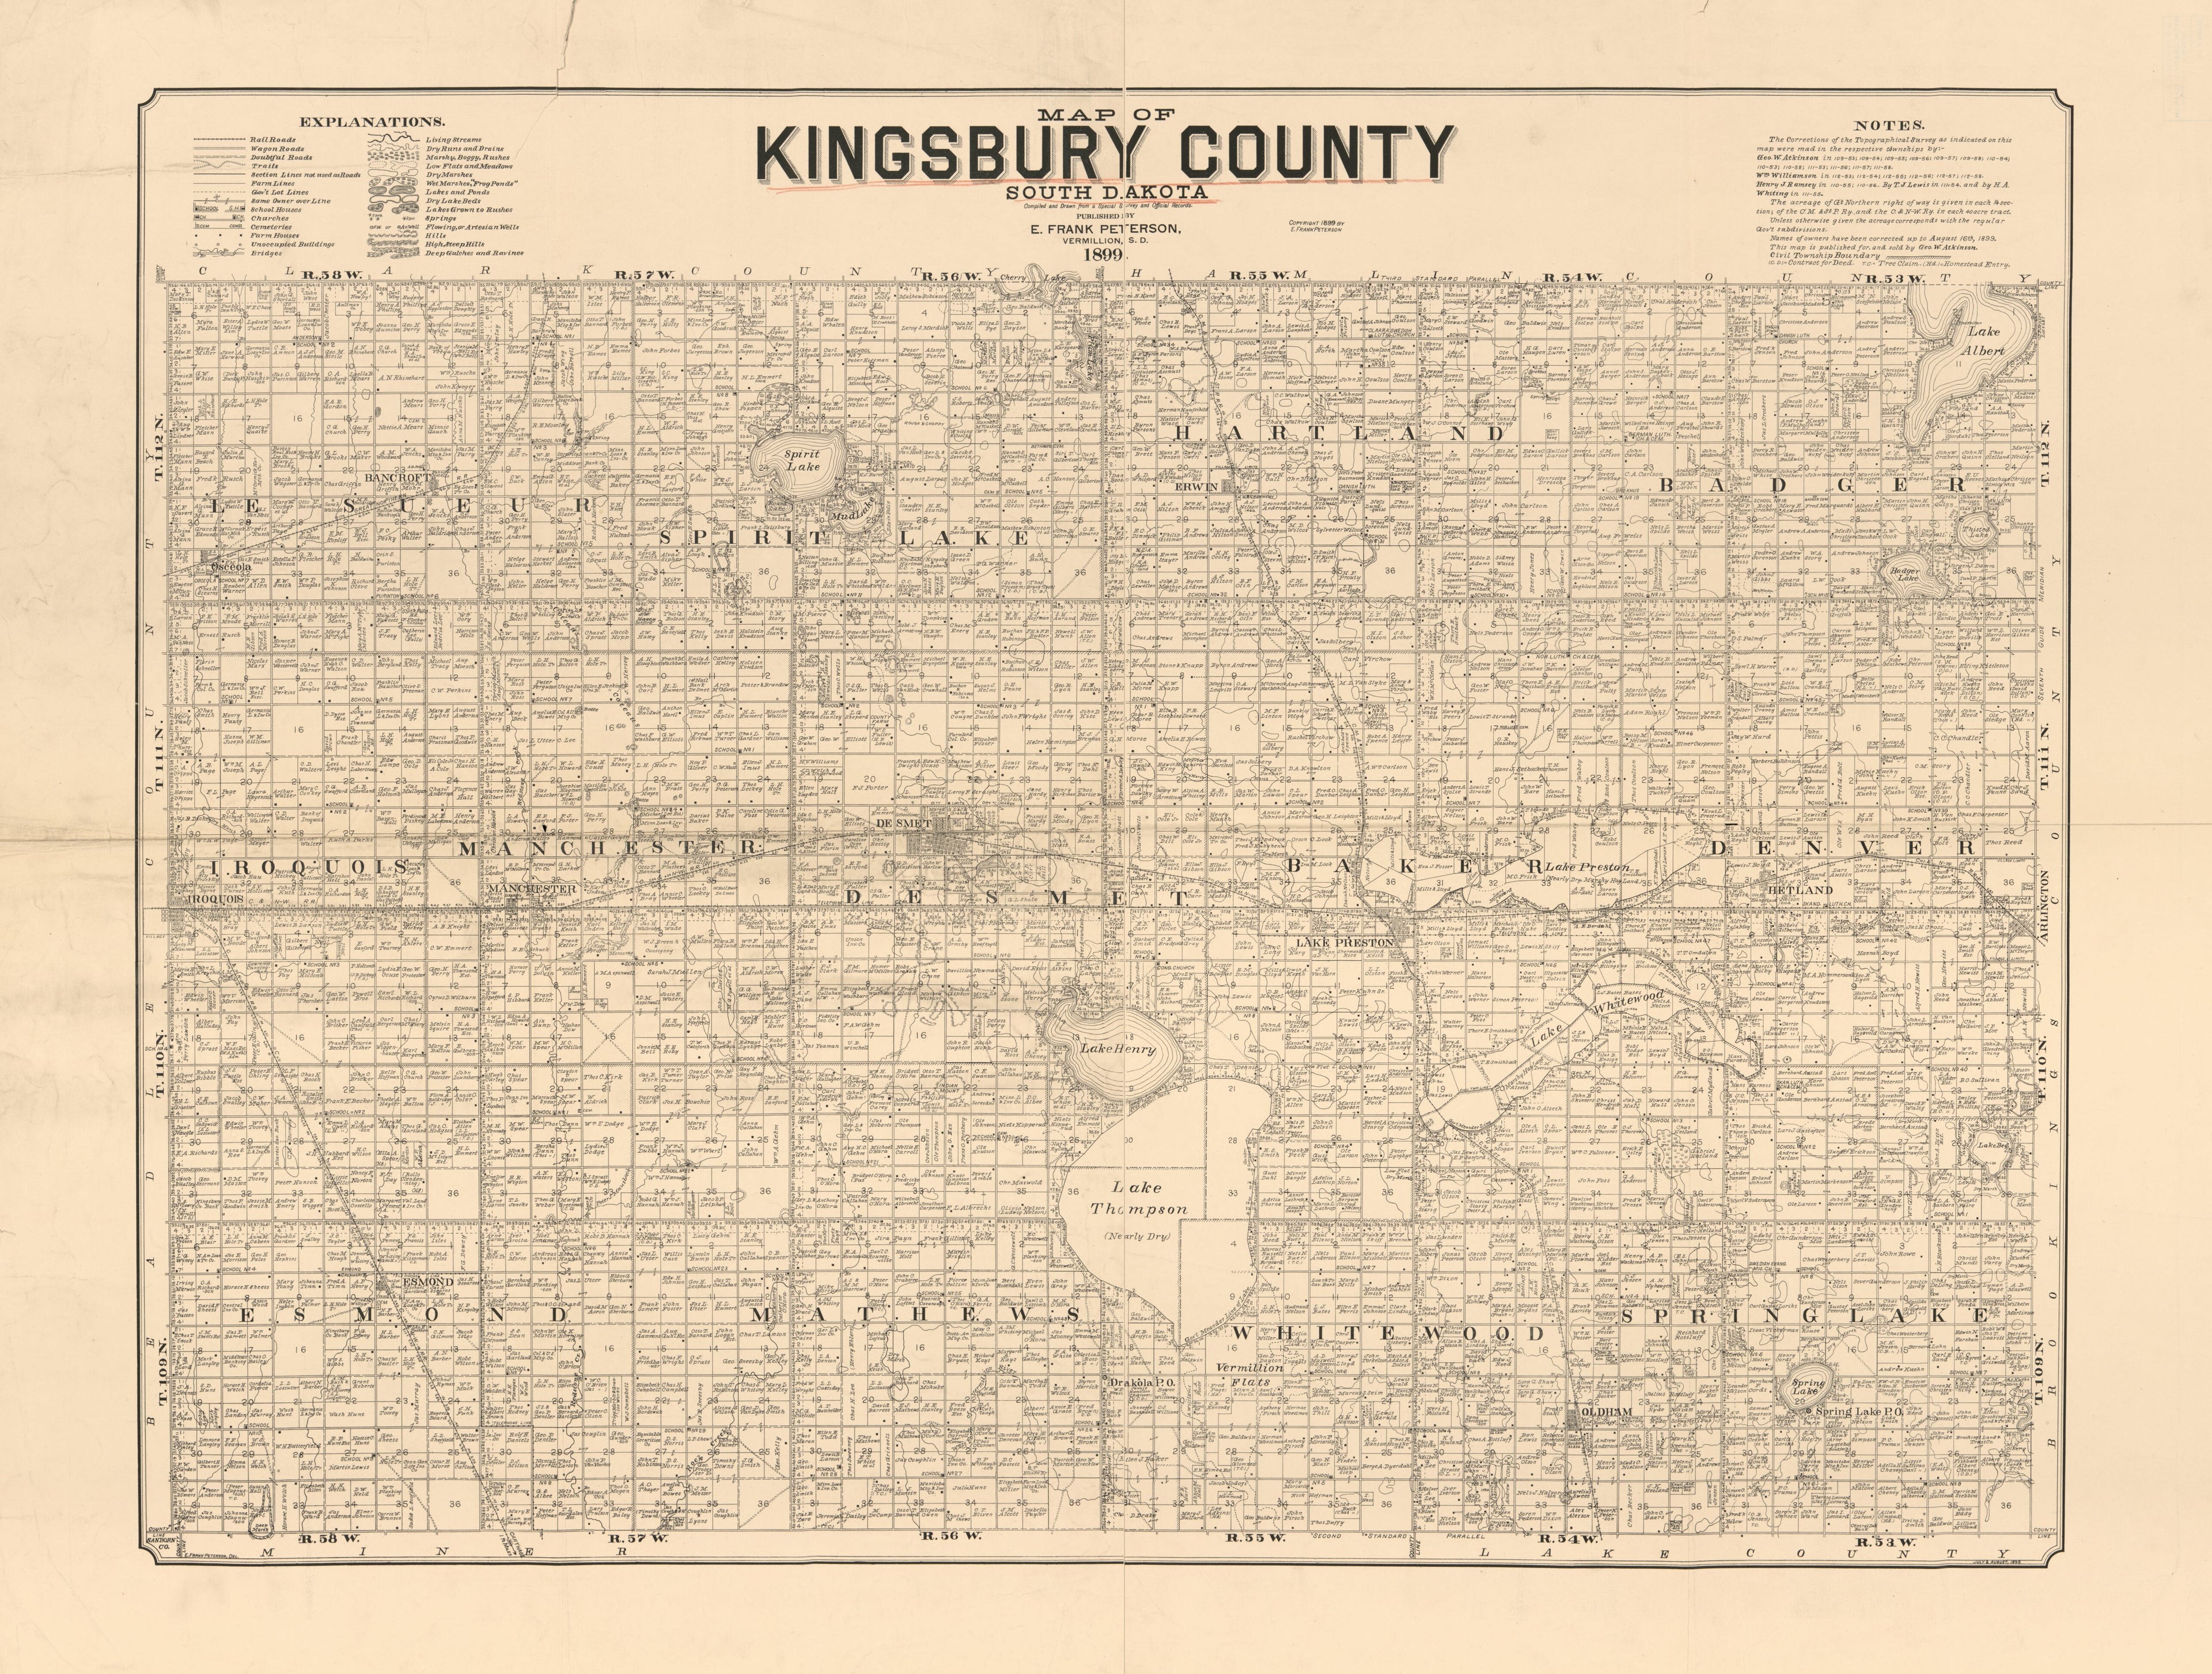 This old map of Map of Kingsbury County, South Dakota : Compiled and Drawn from a Special Survey and Official Records from 1899 was created by E. Frank Peterson in 1899